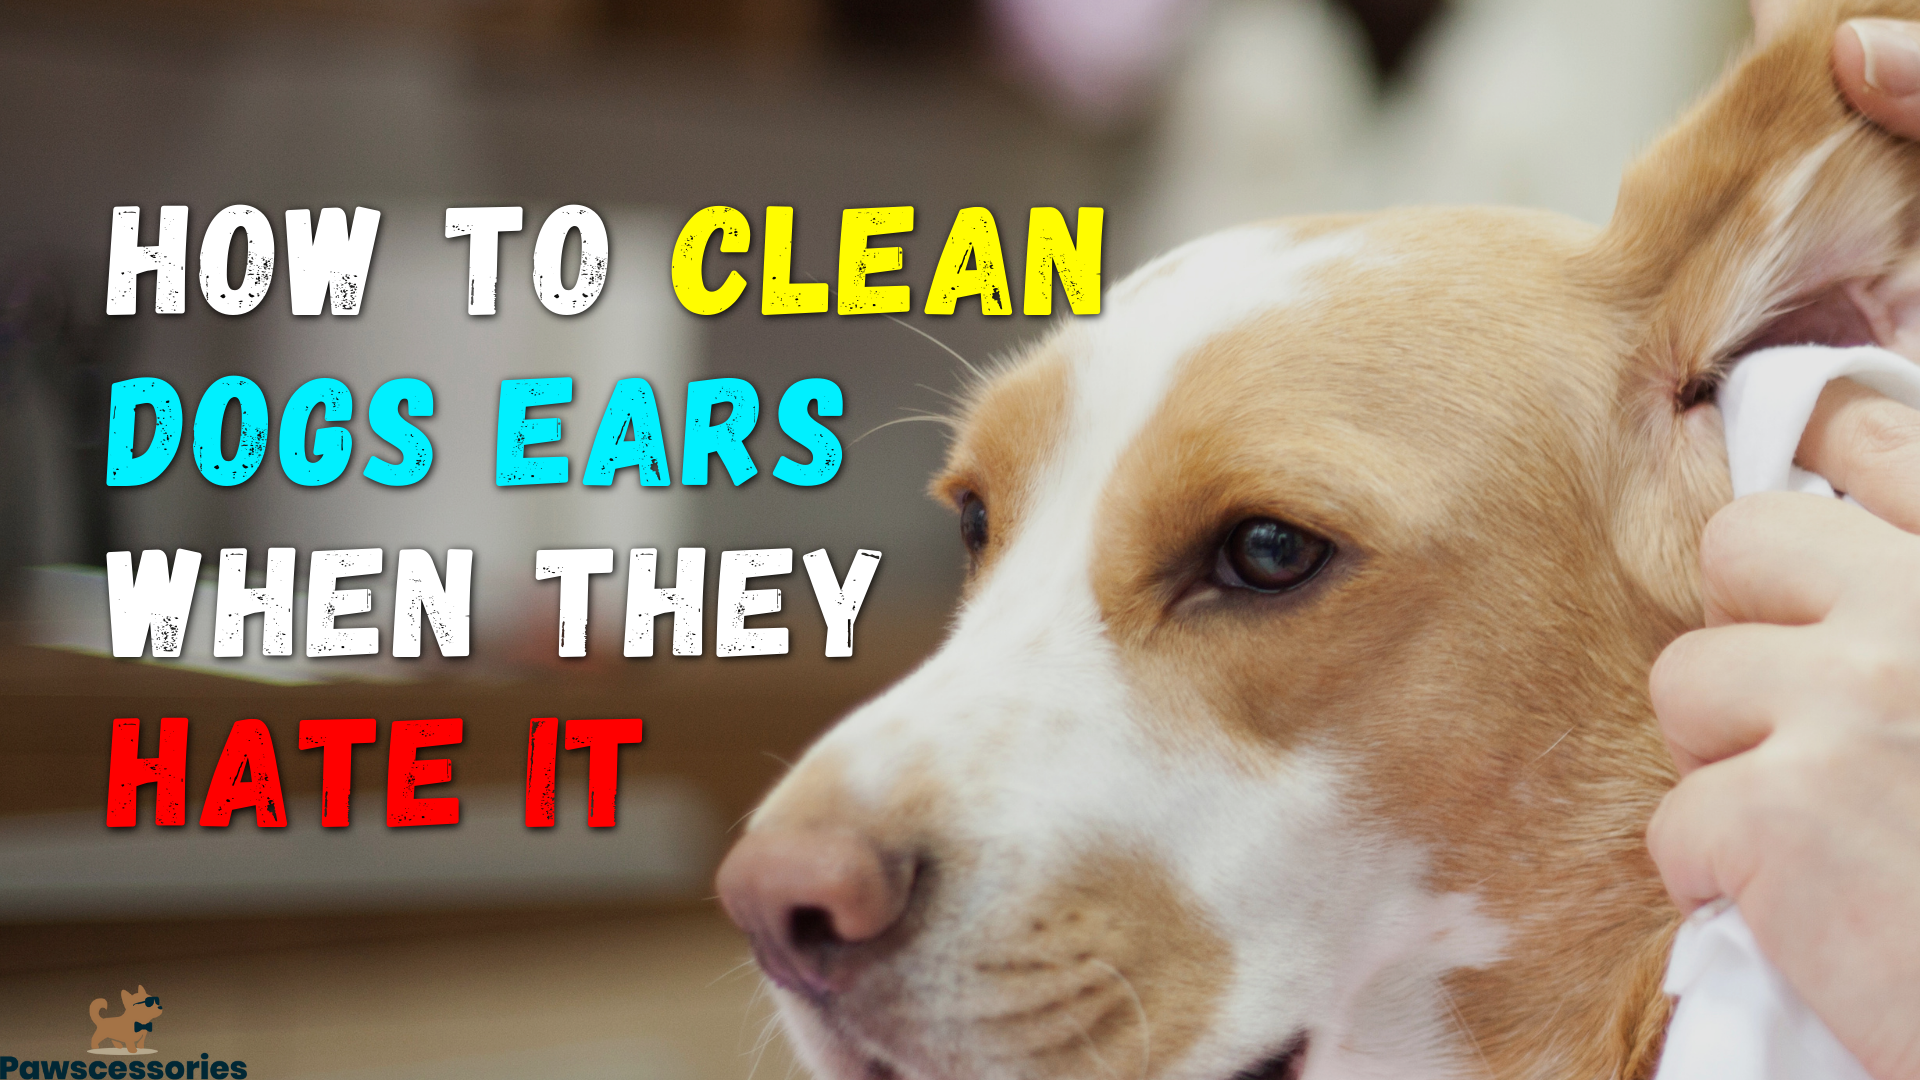 how to clean dog's ears when they hate it